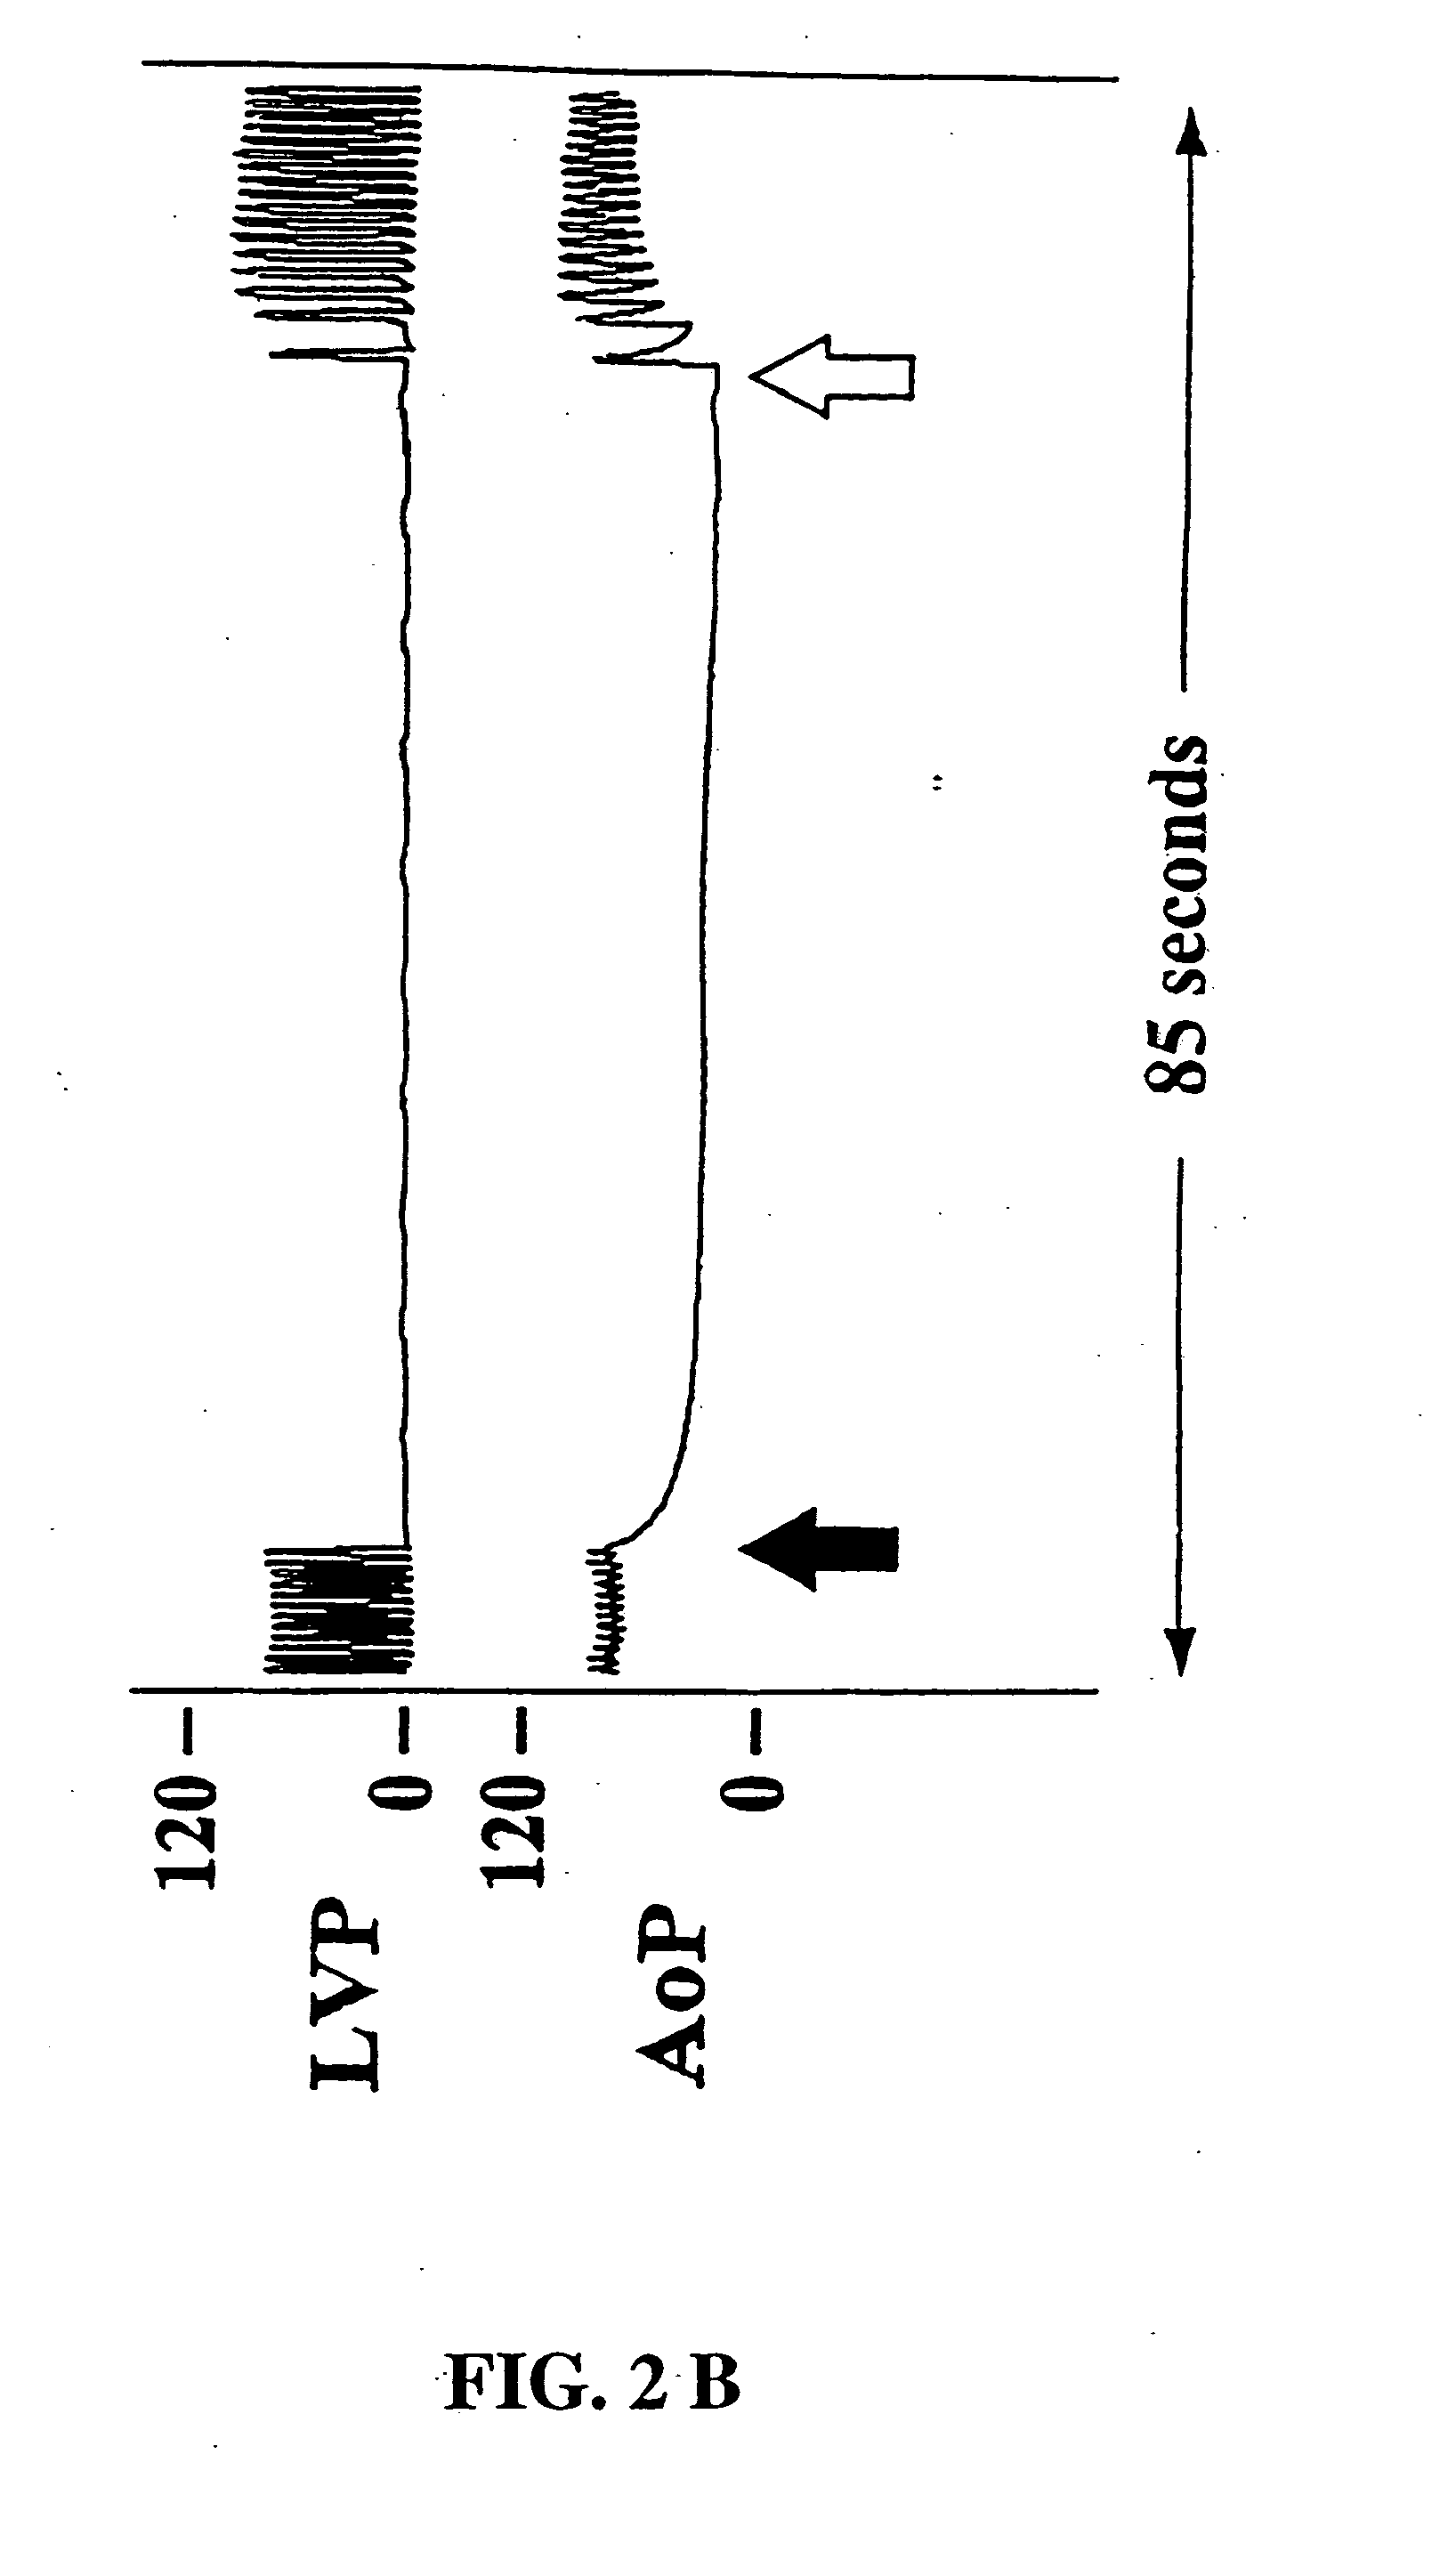 Methods of indirectly stimulating the vagus nerve with an electrical field